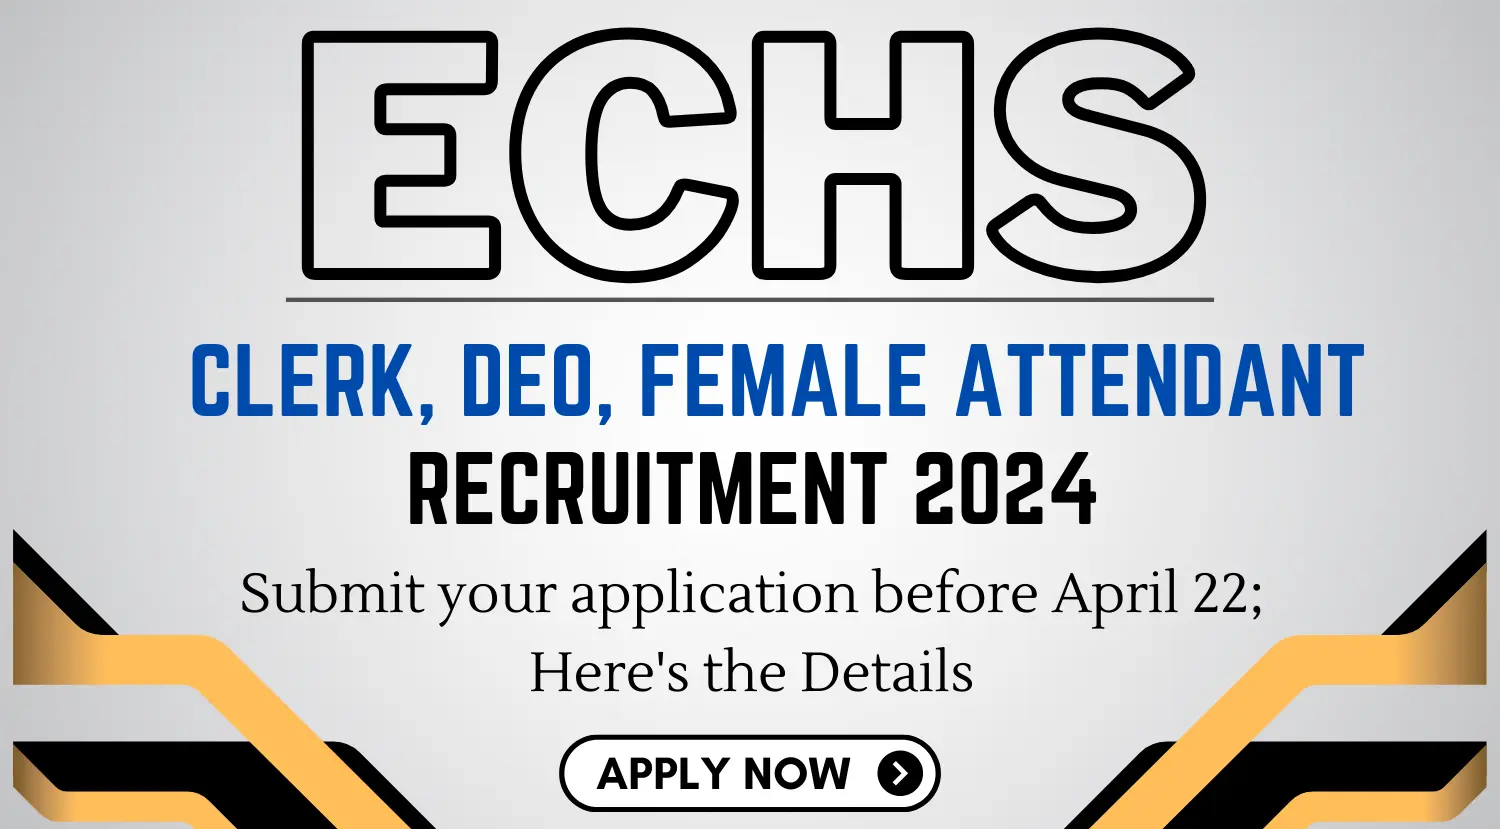 ECHS Staff Recruitment 2024 - Submit your application before April 22 Check Details Here